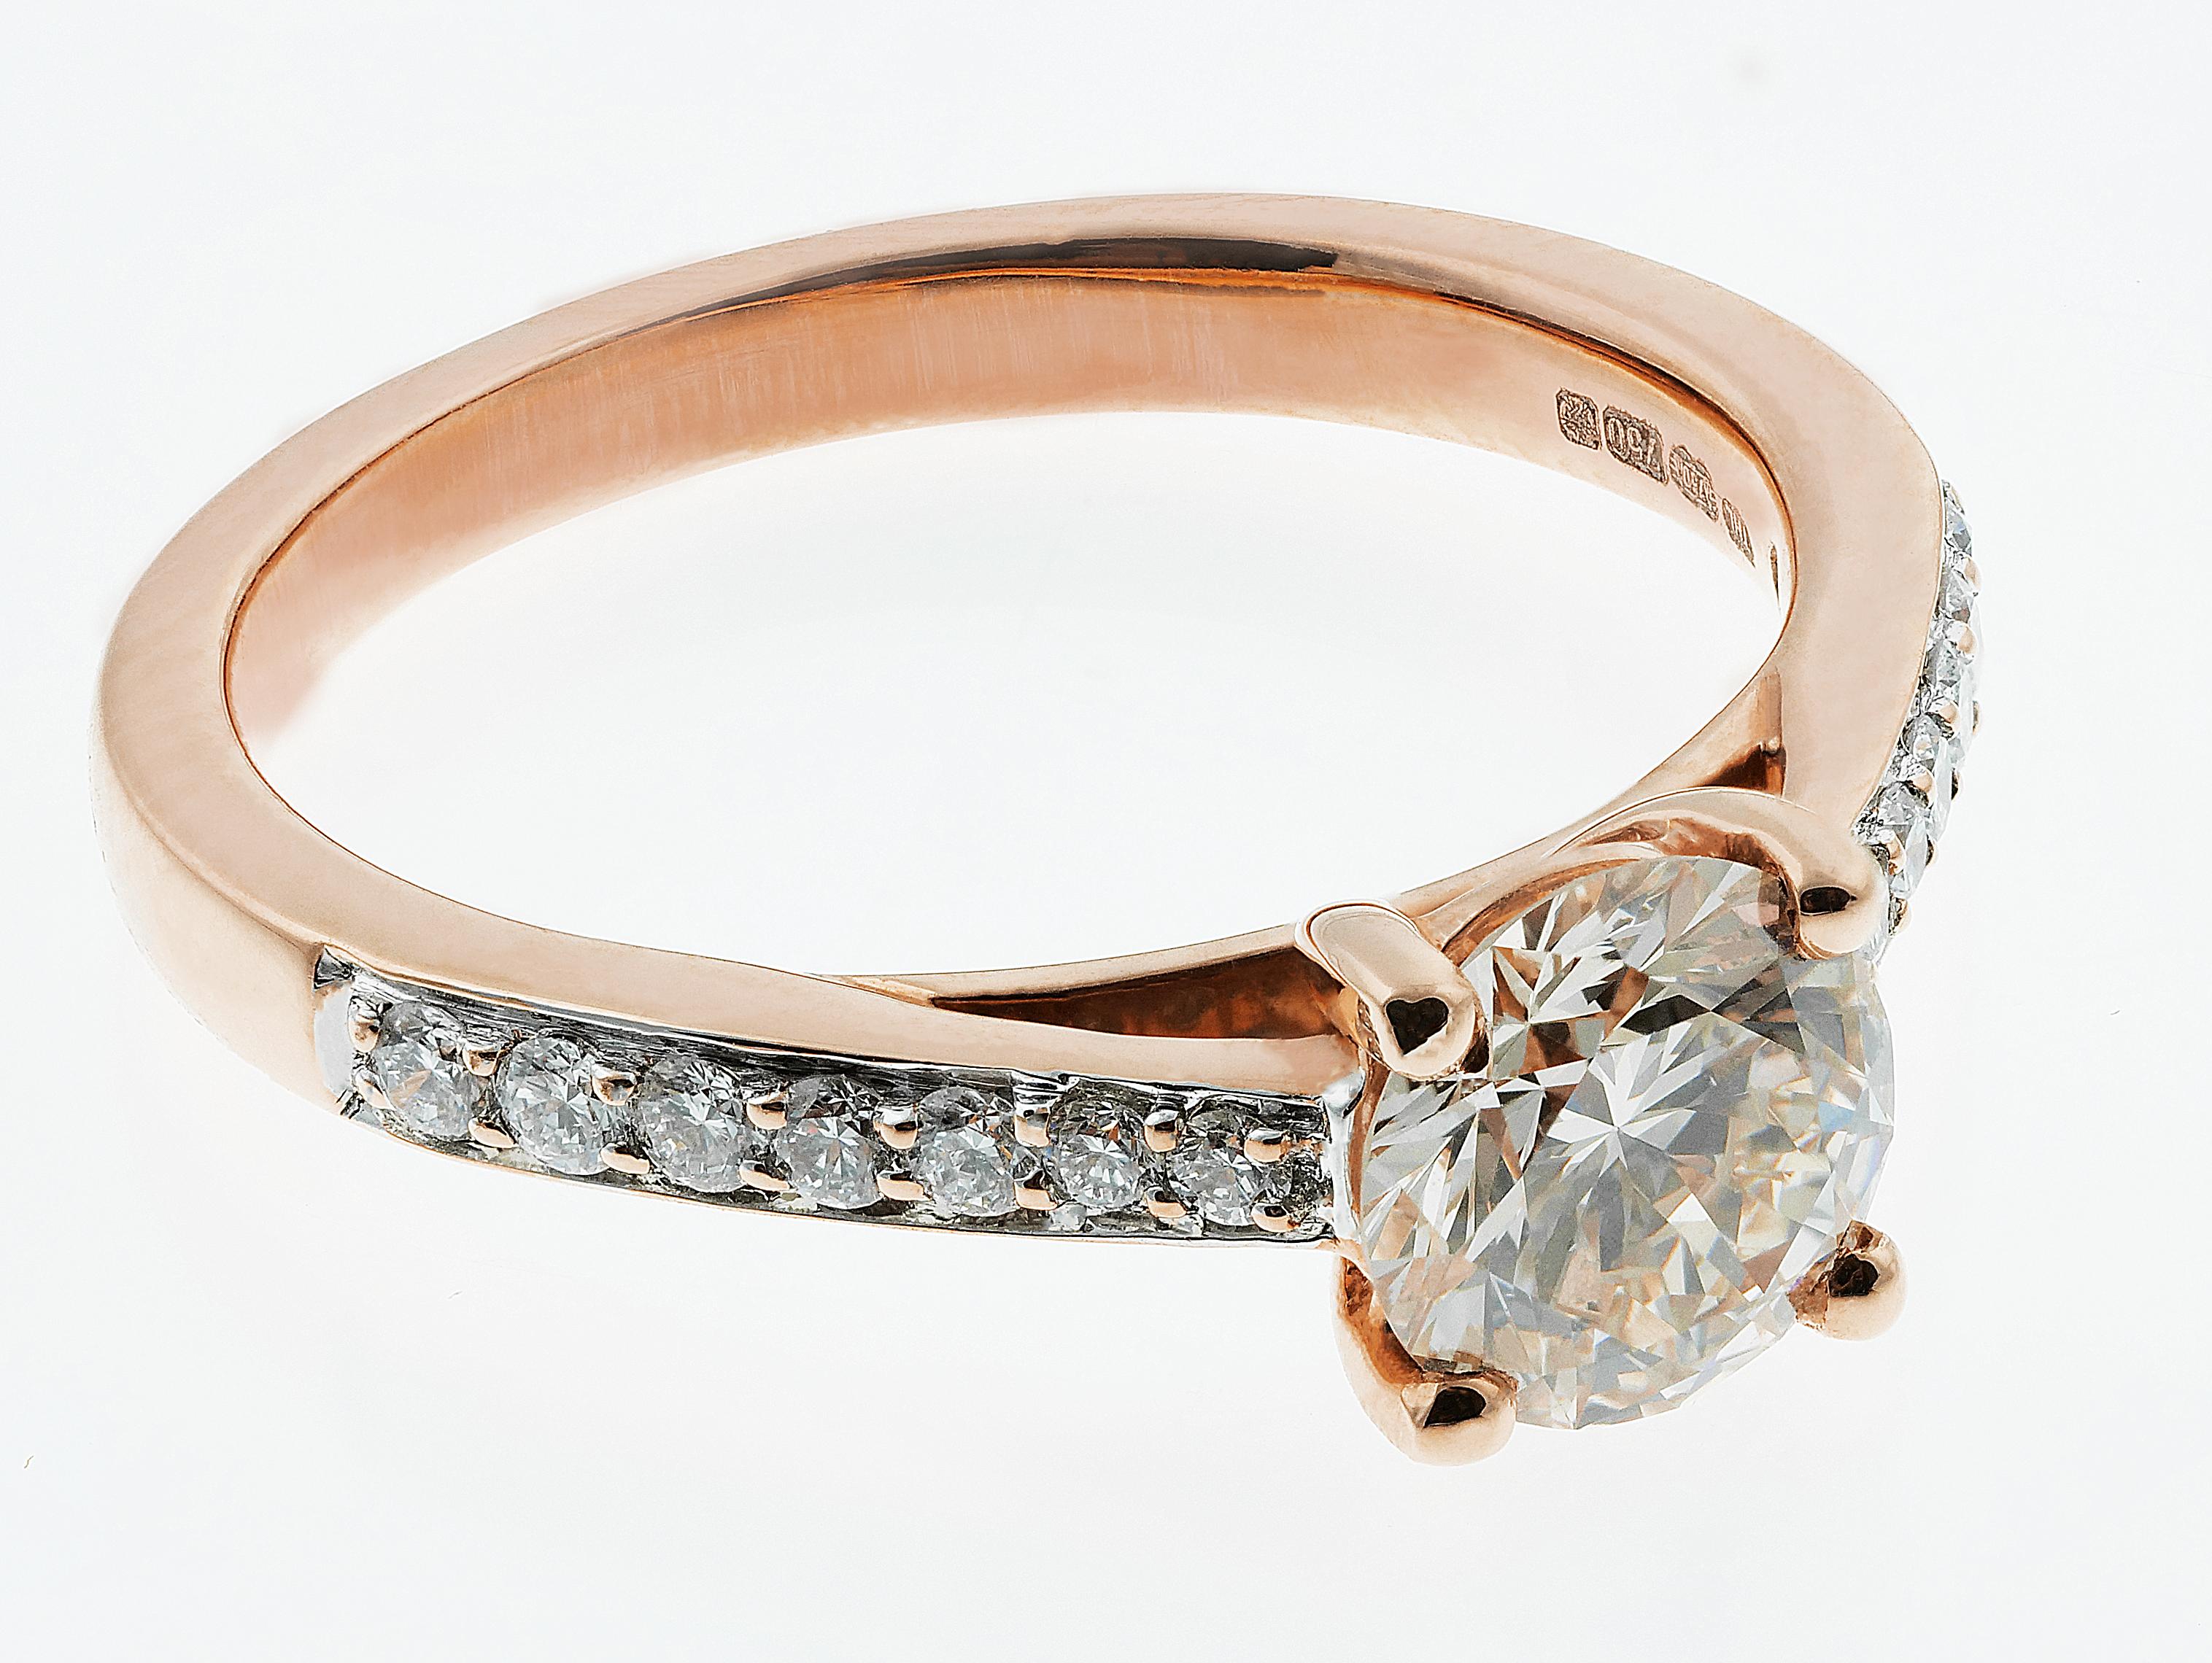 Beautiful 18 ct Rose gold diamond ring consisting of a glistening round brilliant cut diamond, accompanied by 14 diamonds on the shoulders along the finite rose gold band.
1 x Round Brilliant Cut Diamond, carat weight: 0.85 carats, assessed colour: